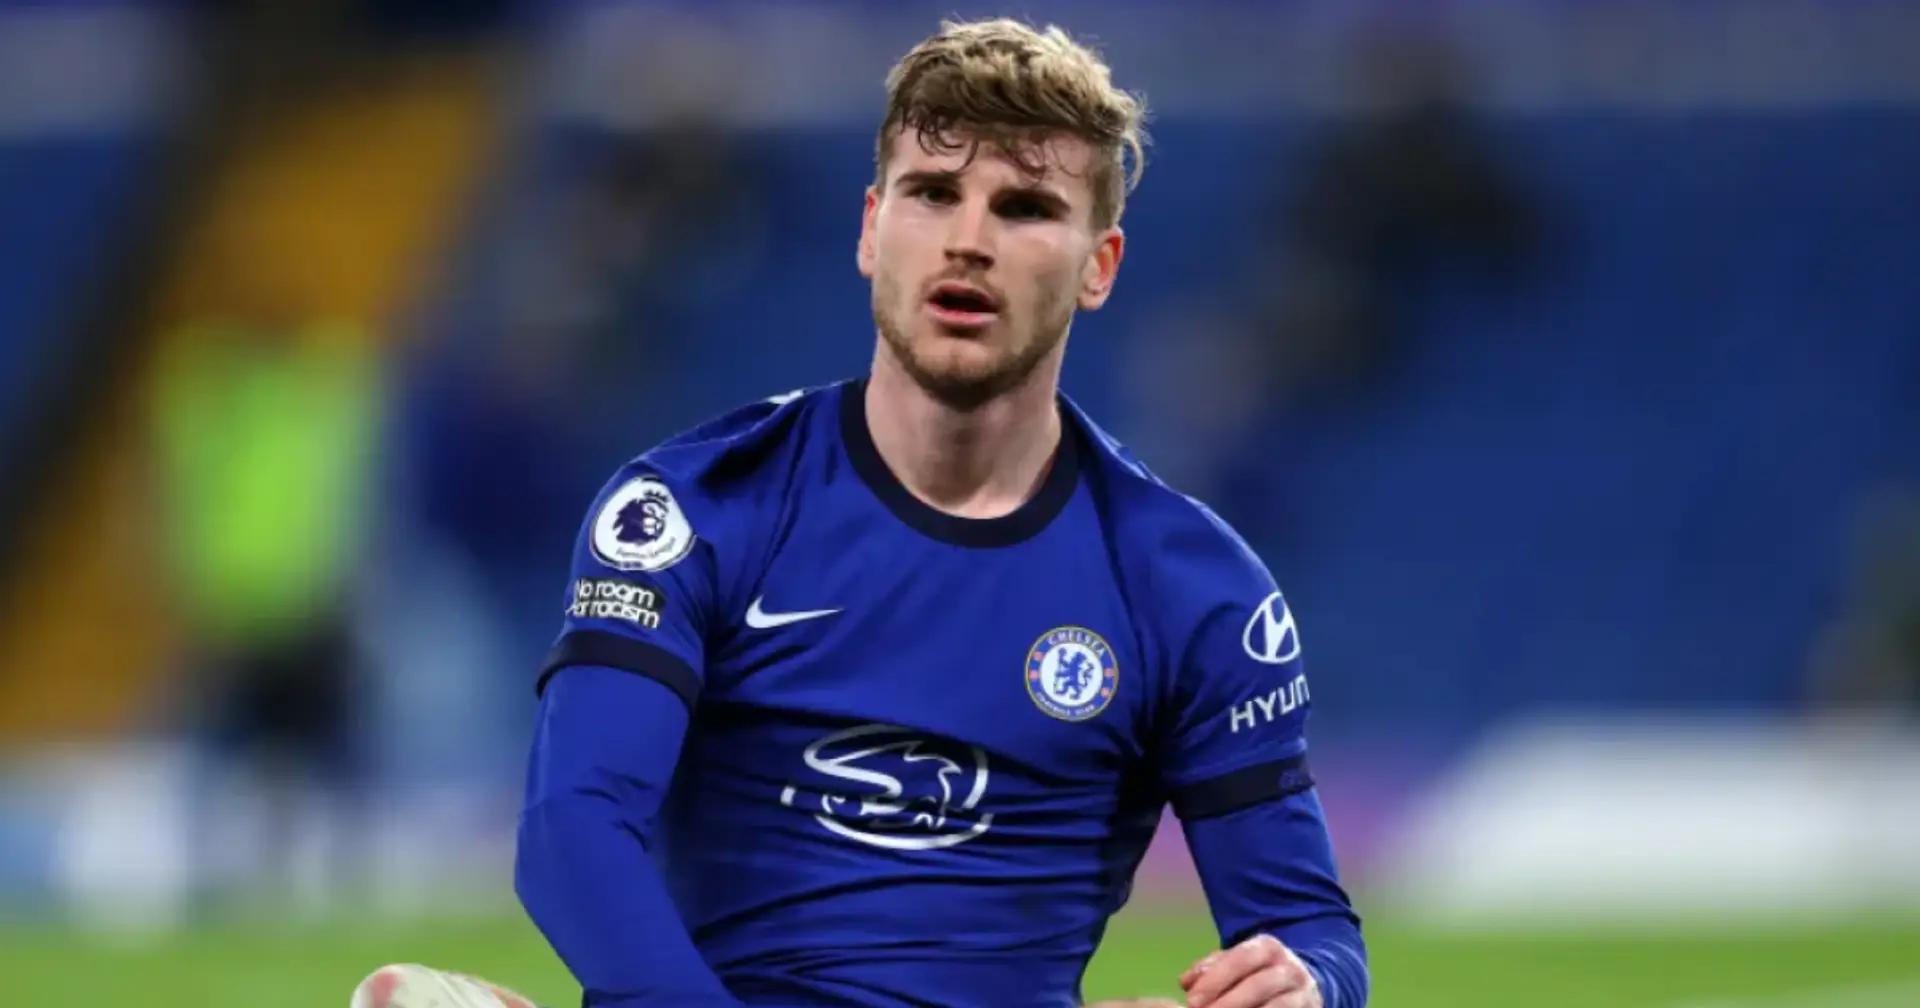 Reports claim Werner's stint at Chelsea is one of the reasons he's not up for joining a Premier League team